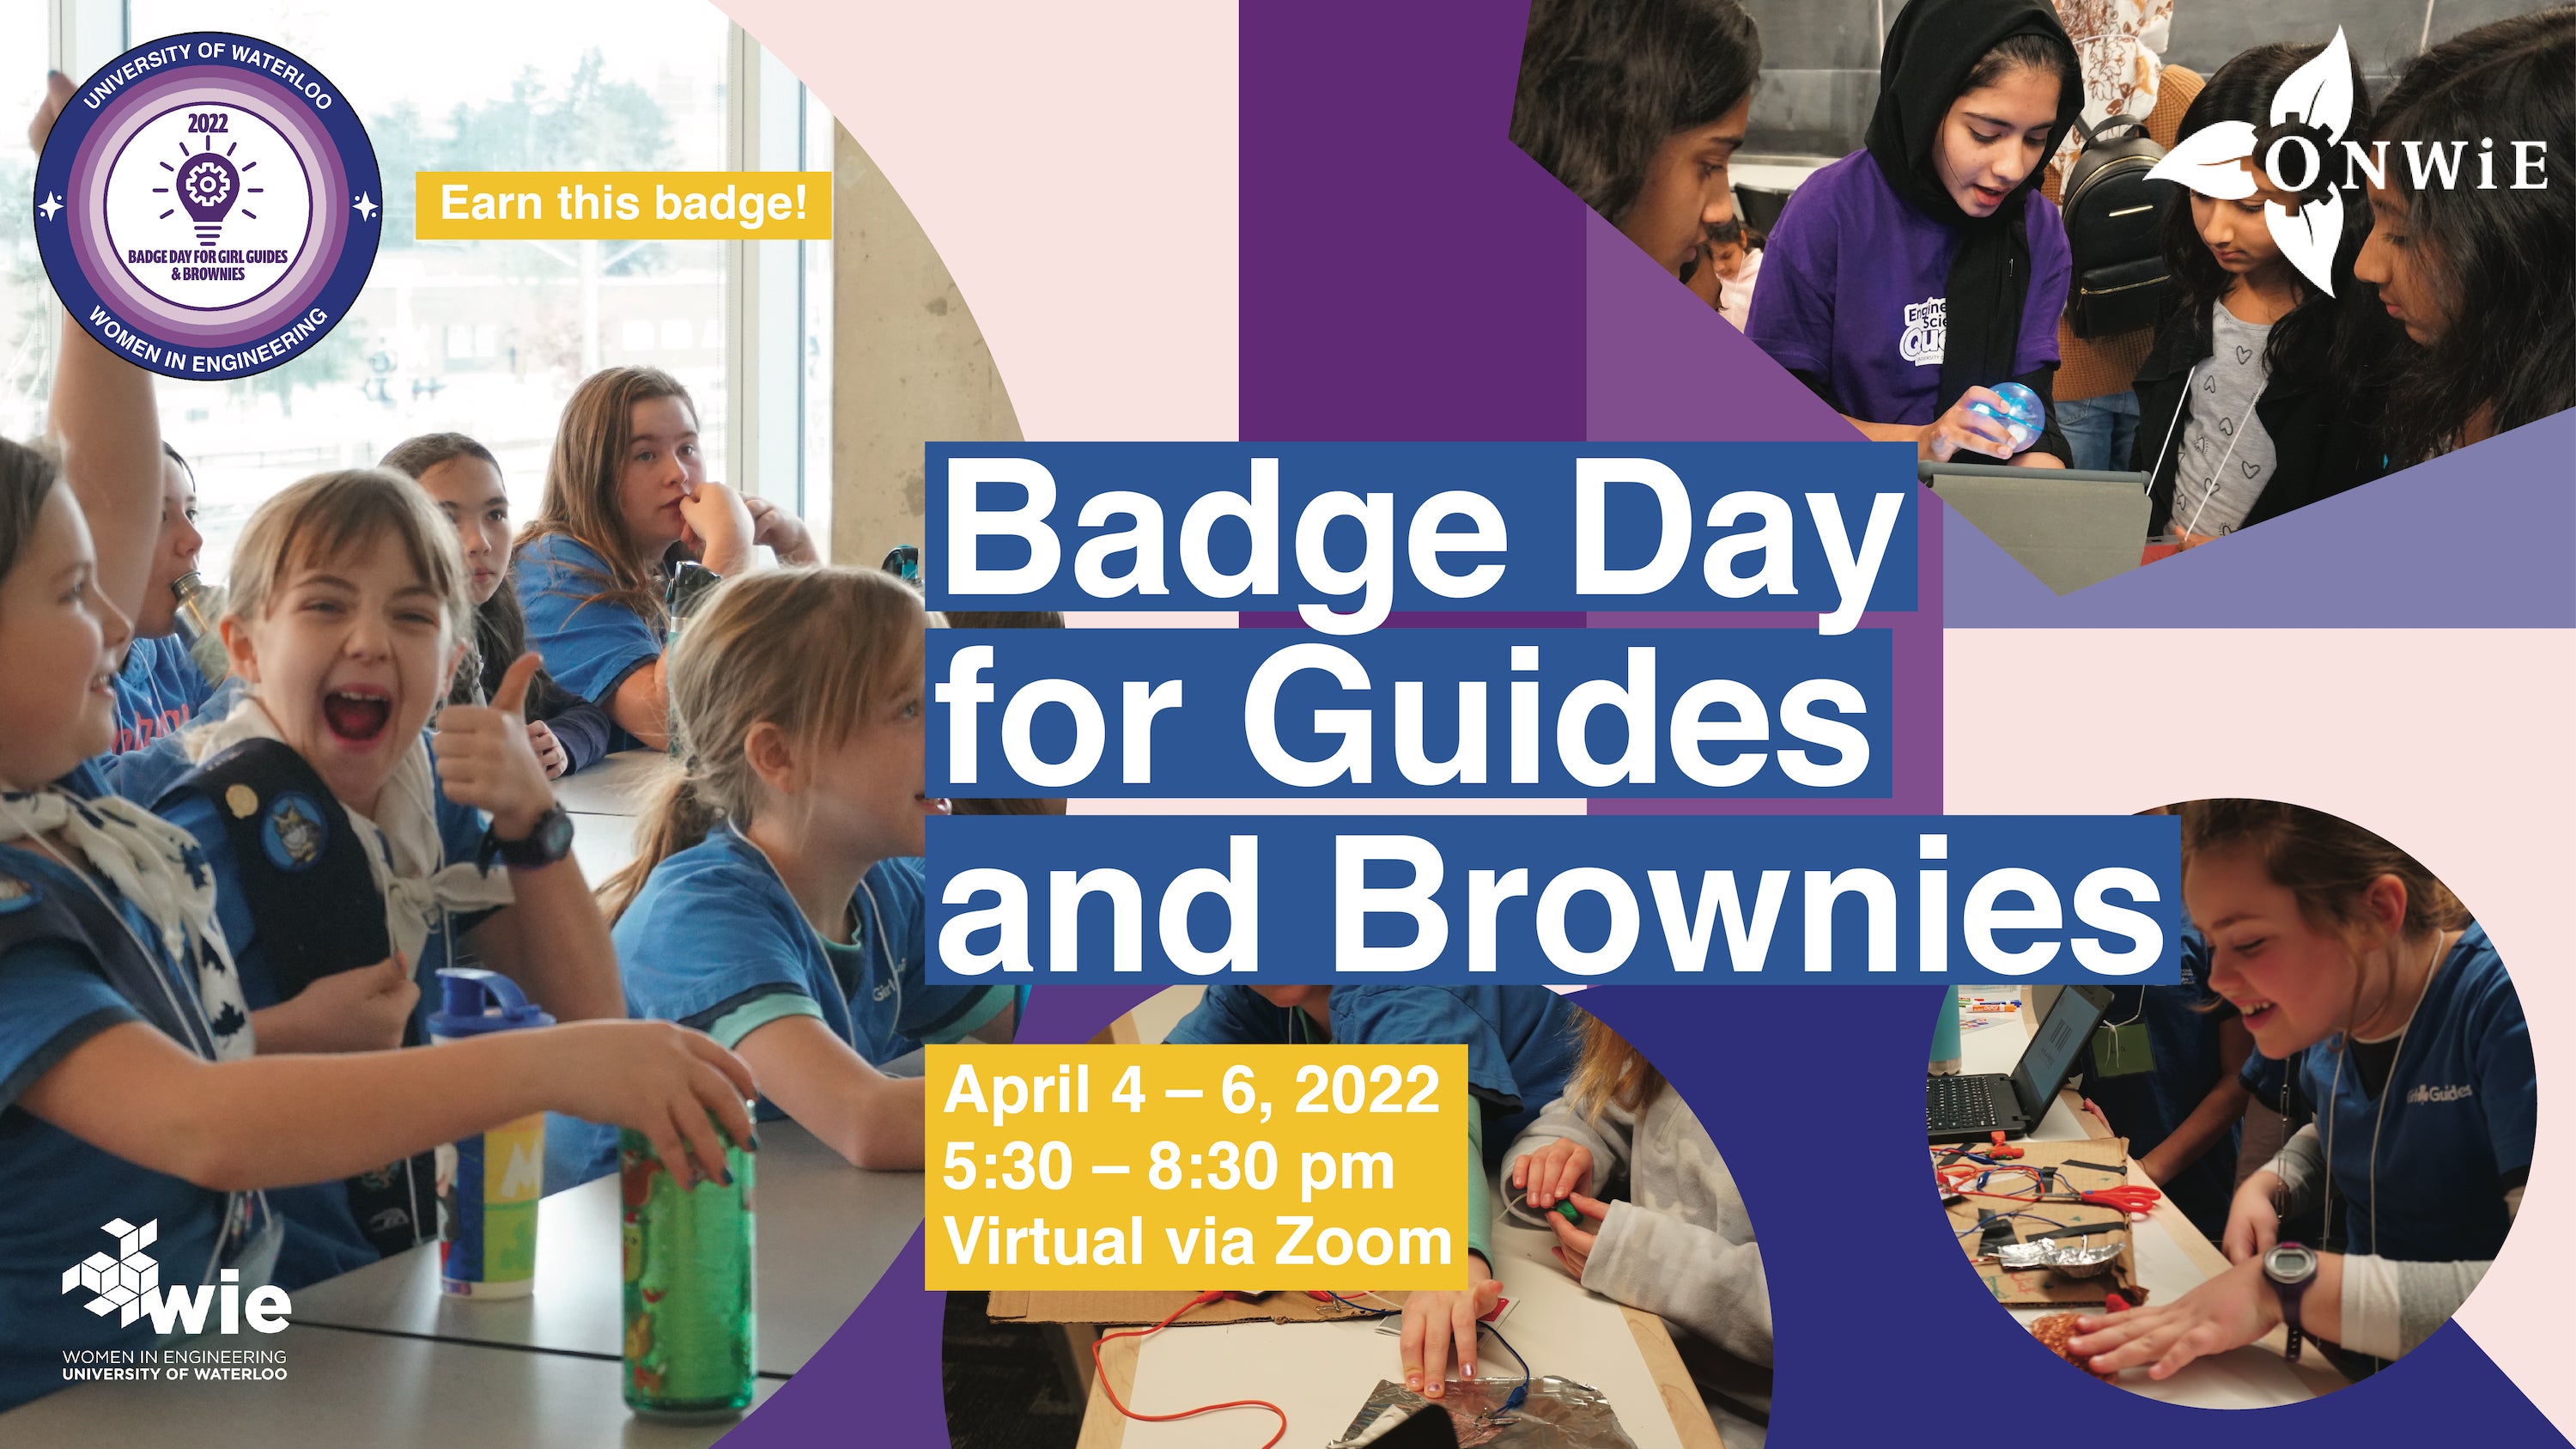 poster mentioning badge day for guides and brownies happening virtually on zoom on April 4th,5th and 6th 2022